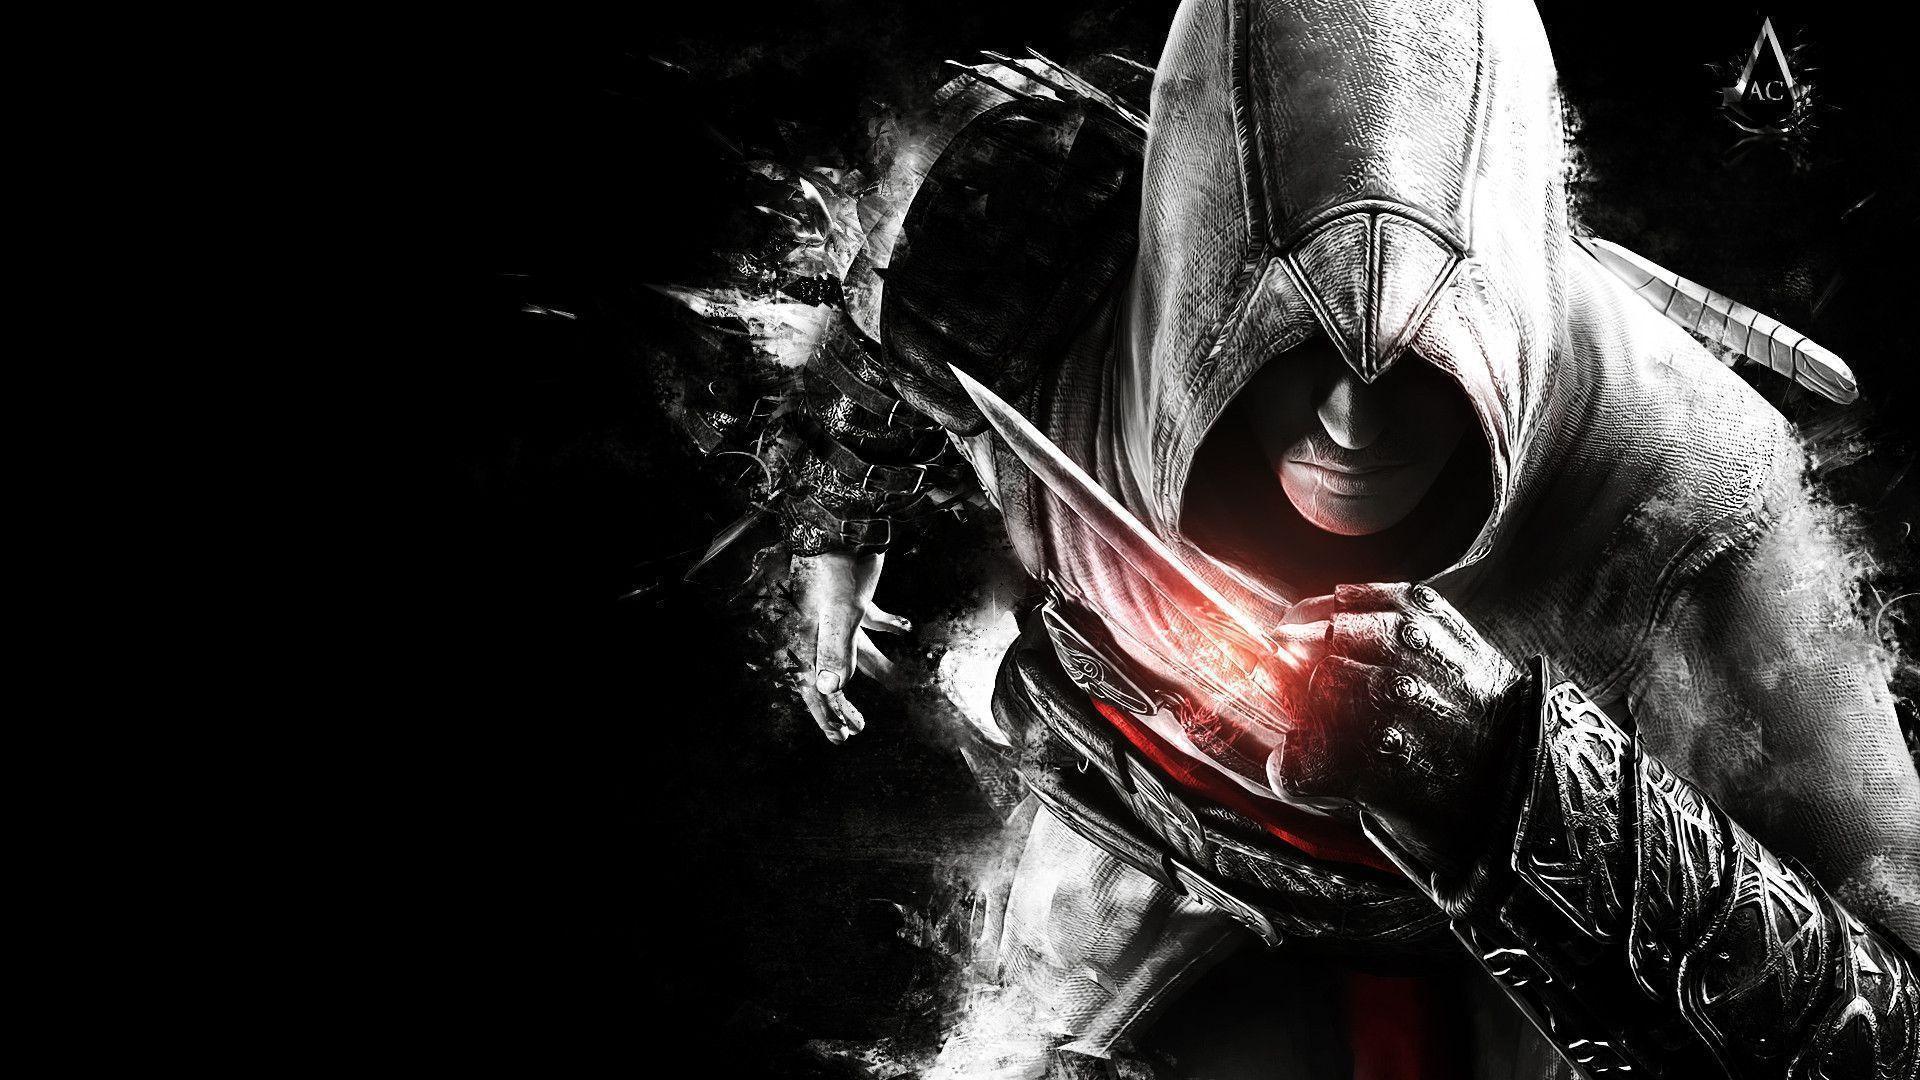 Assassins creed 2K cool wallpapers